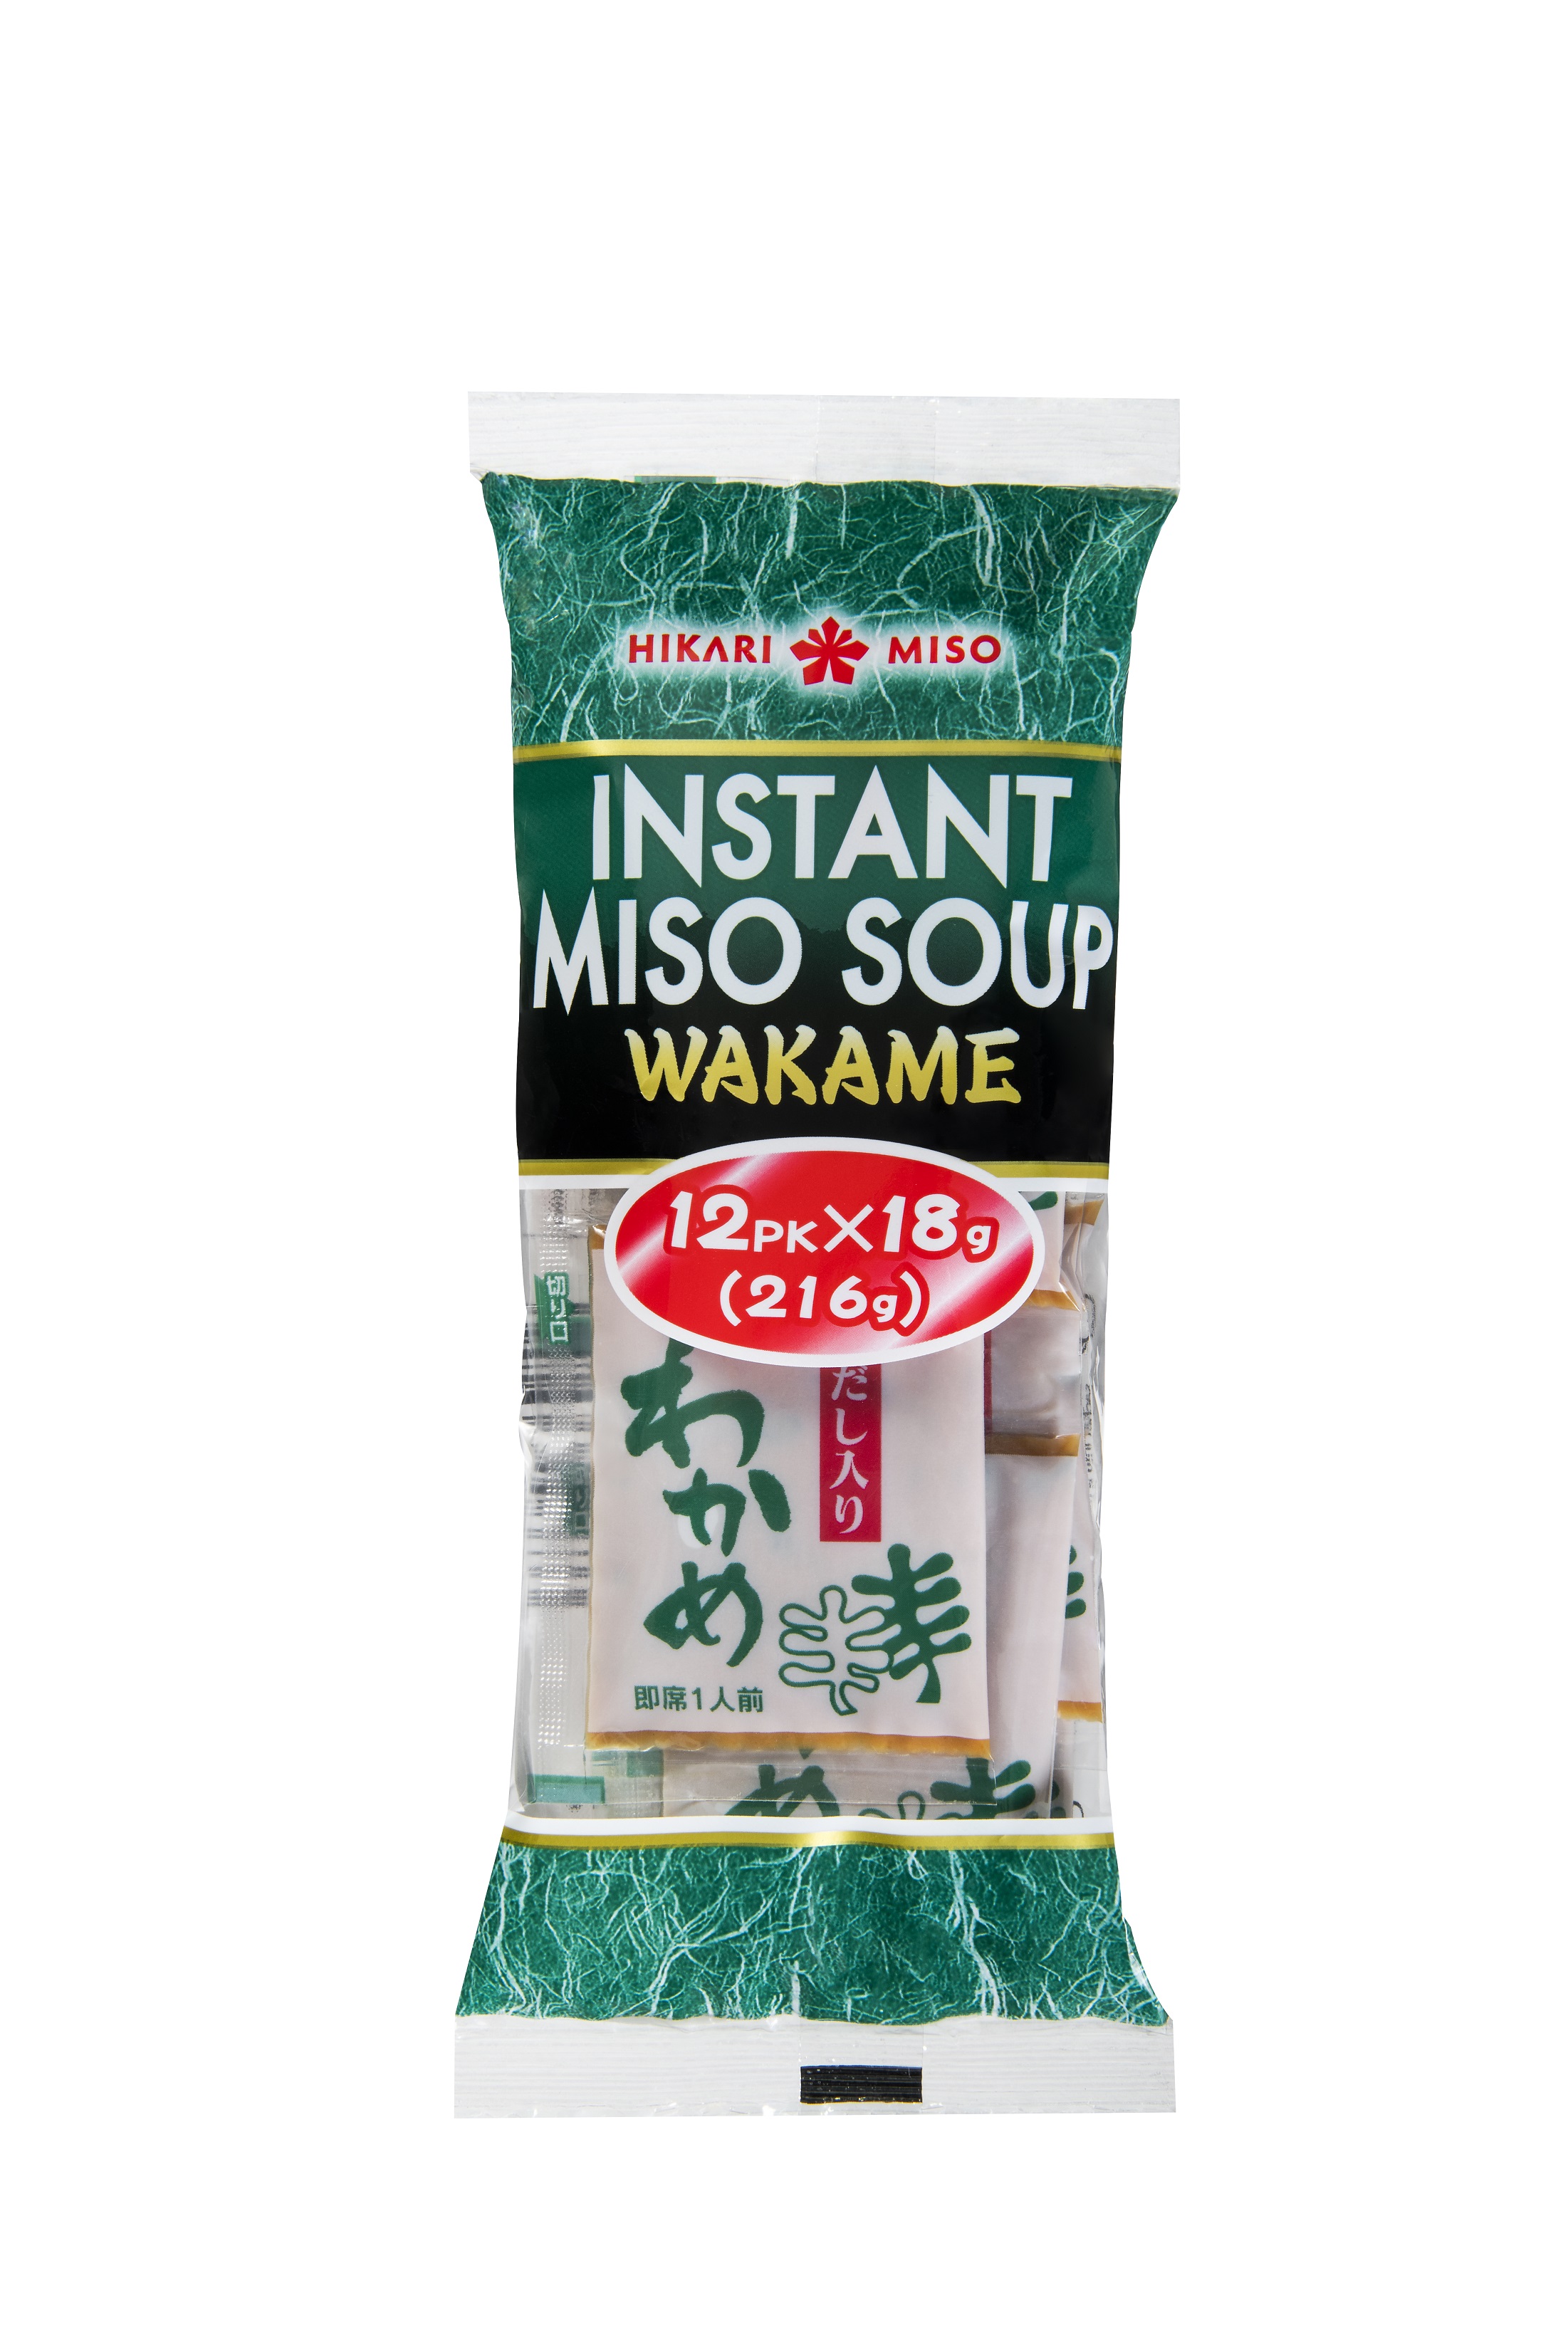 Wakame Miso Soup12servings 7.6 oz(216g)